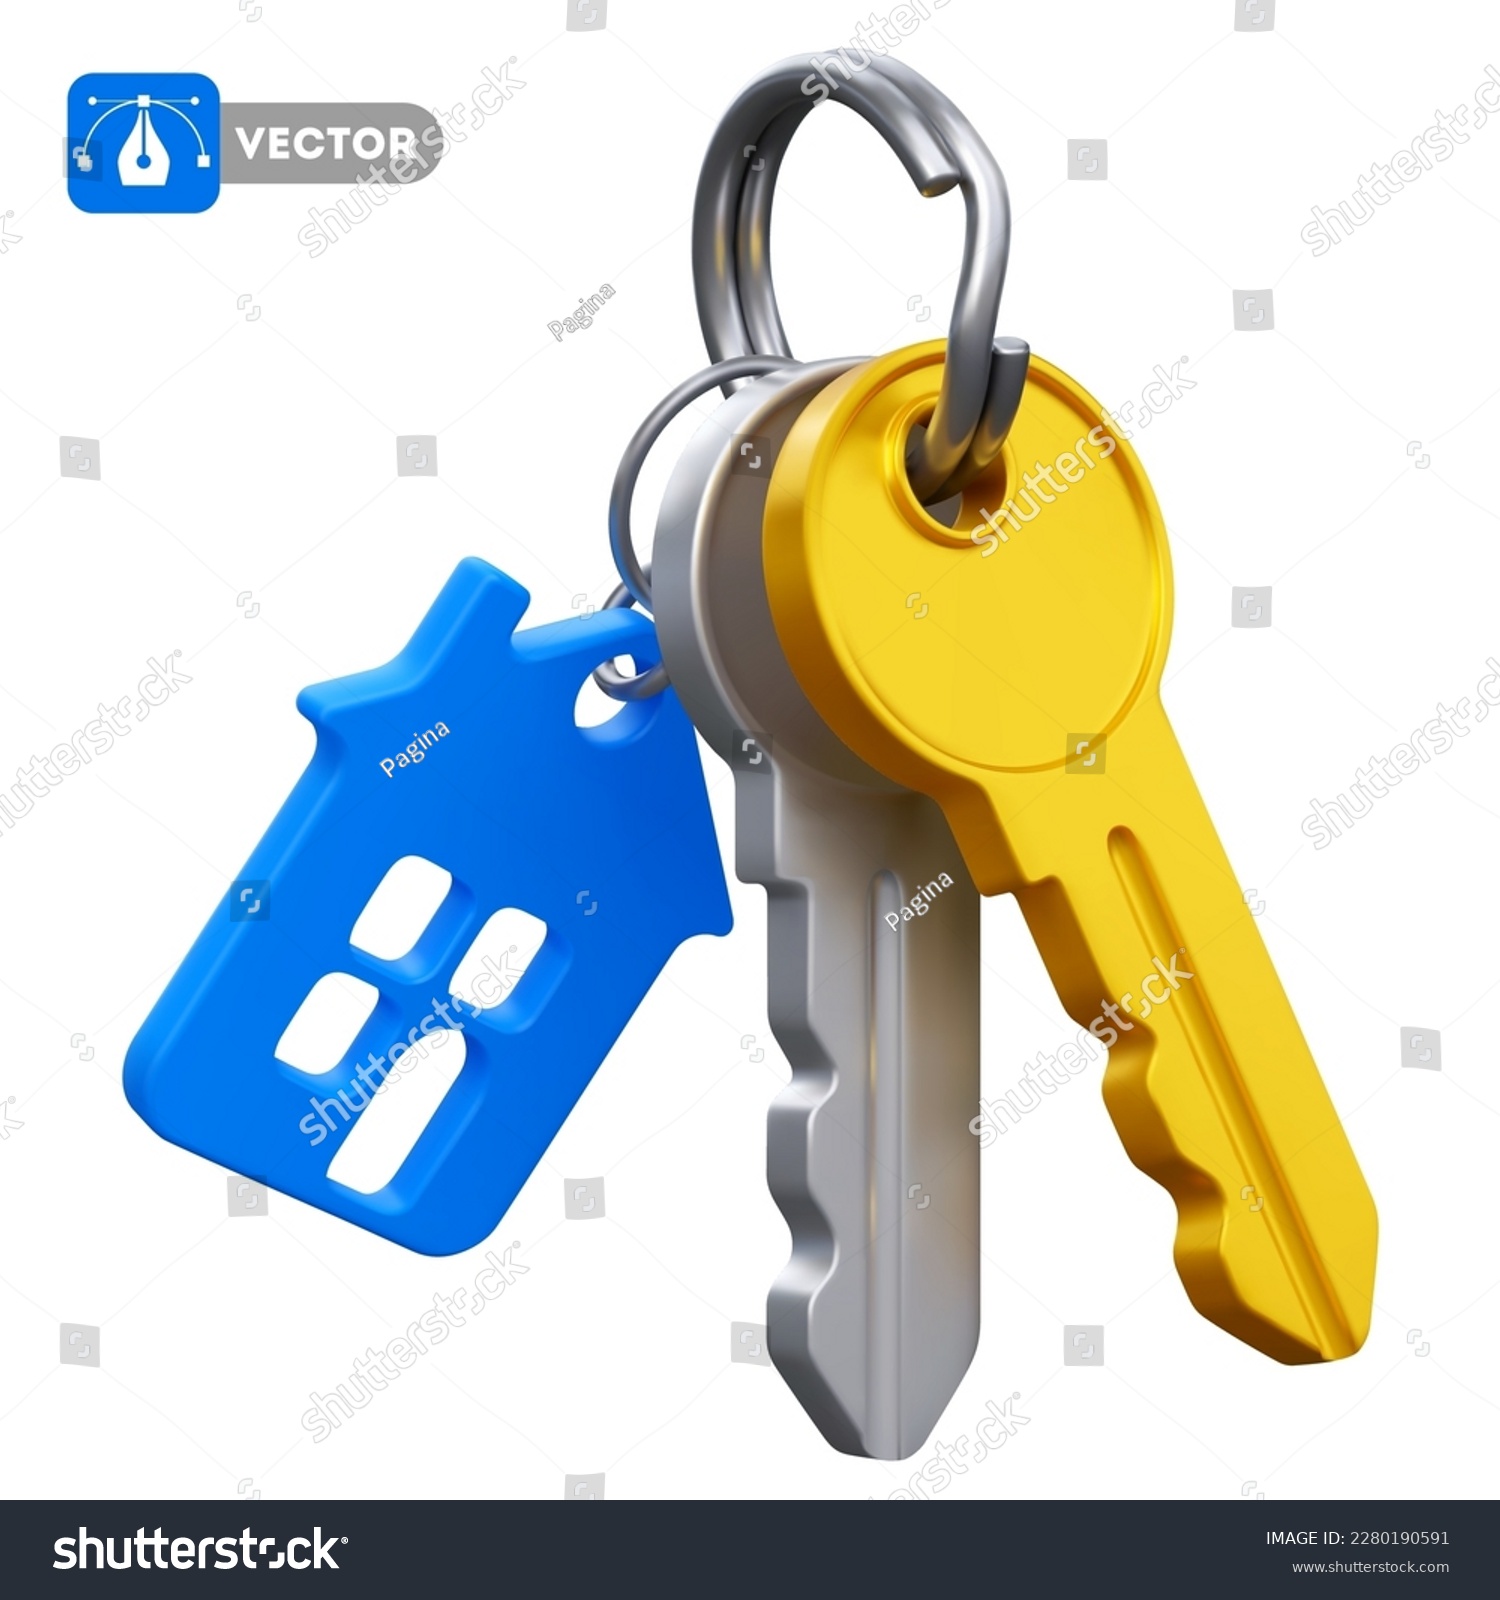 SVG of Keys with key chain in the form of house. Concept on real estate theme, buying, selling, protection, security, property insurance. Isolated on white background. Vector 3d realistic illustration svg